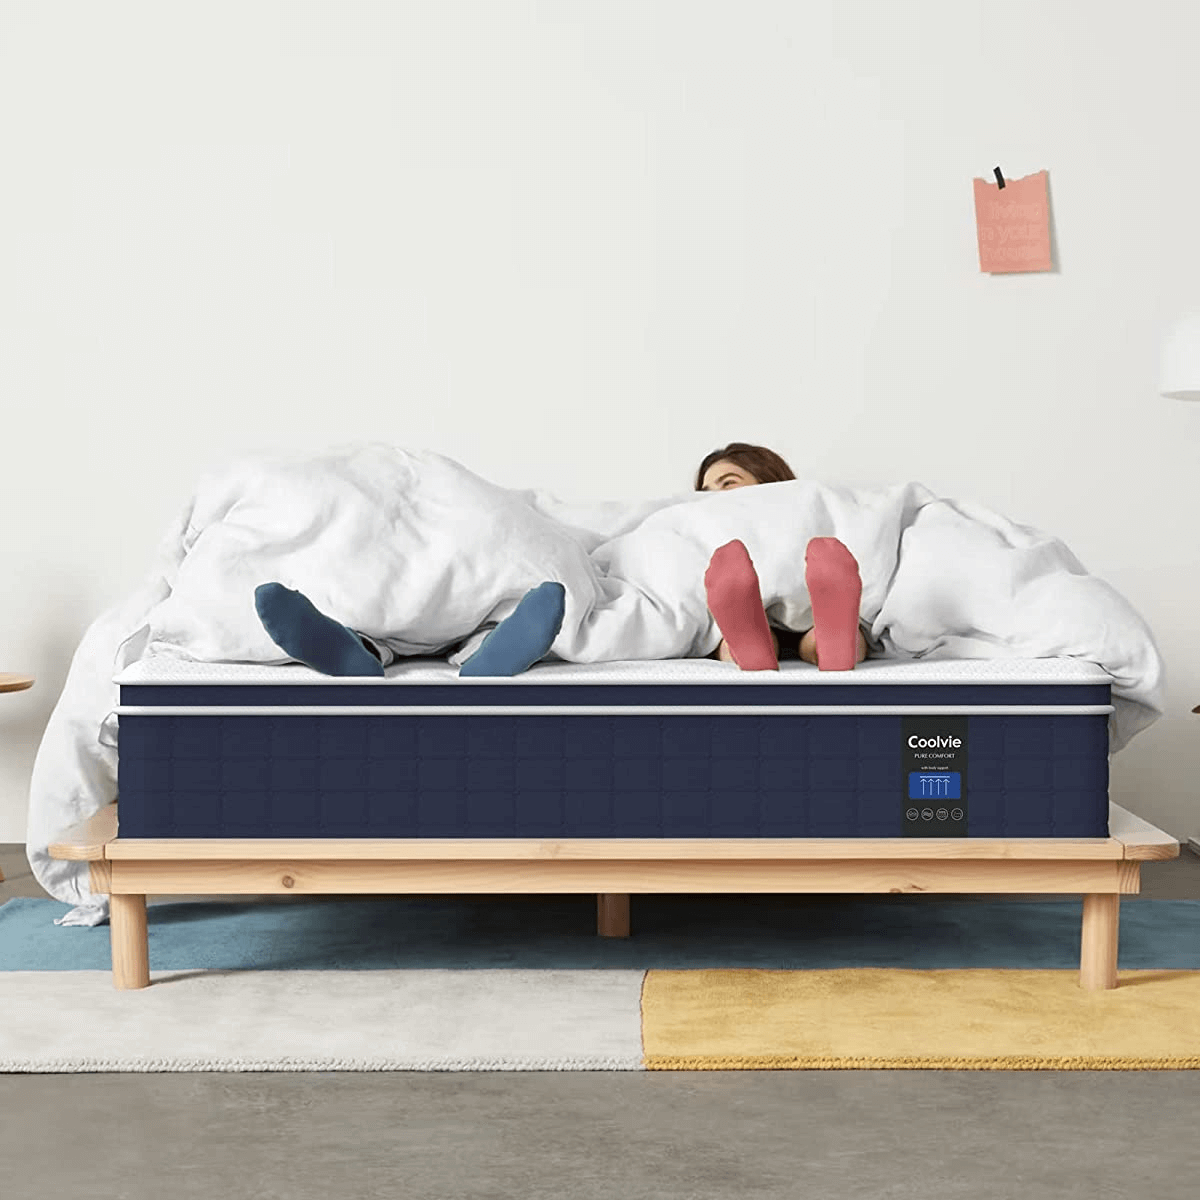 Coolvie mattress is an ideal choice for back sleepers